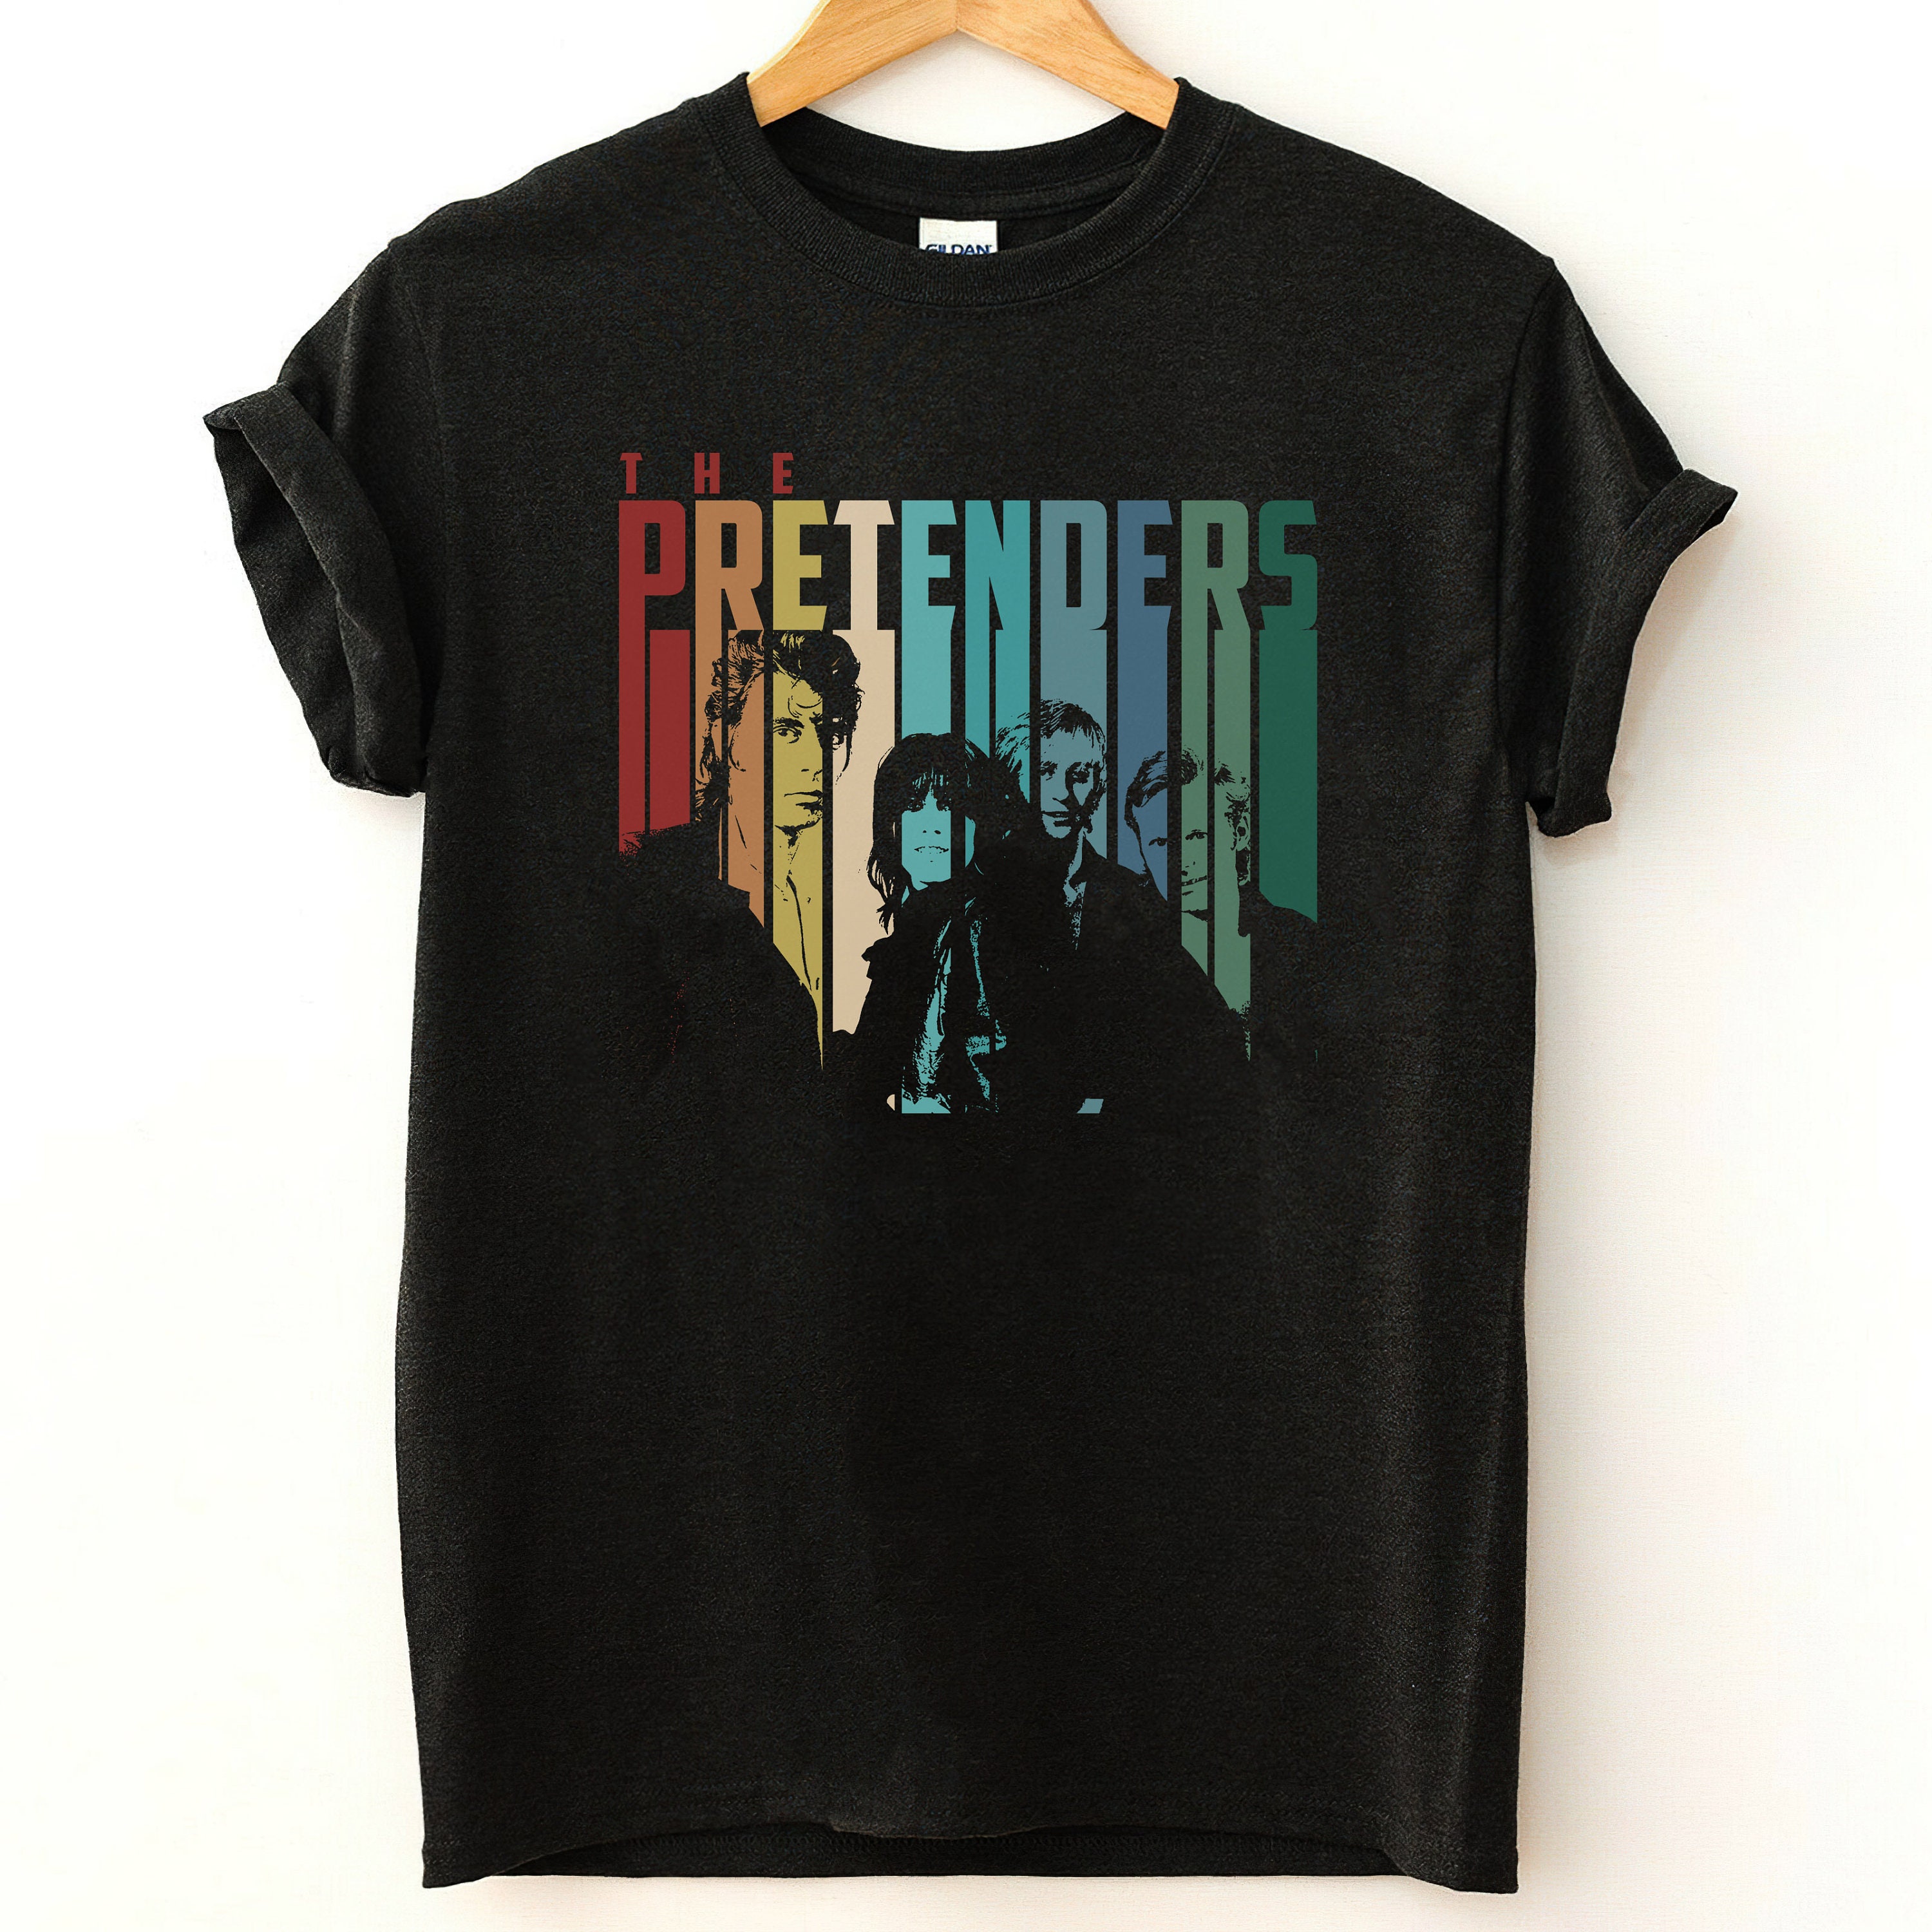 Discover Retro Vintage The Pretenders Band Band T-Shirt, The Pretenders Shirt, Retro Gift Tee For Woman and Man